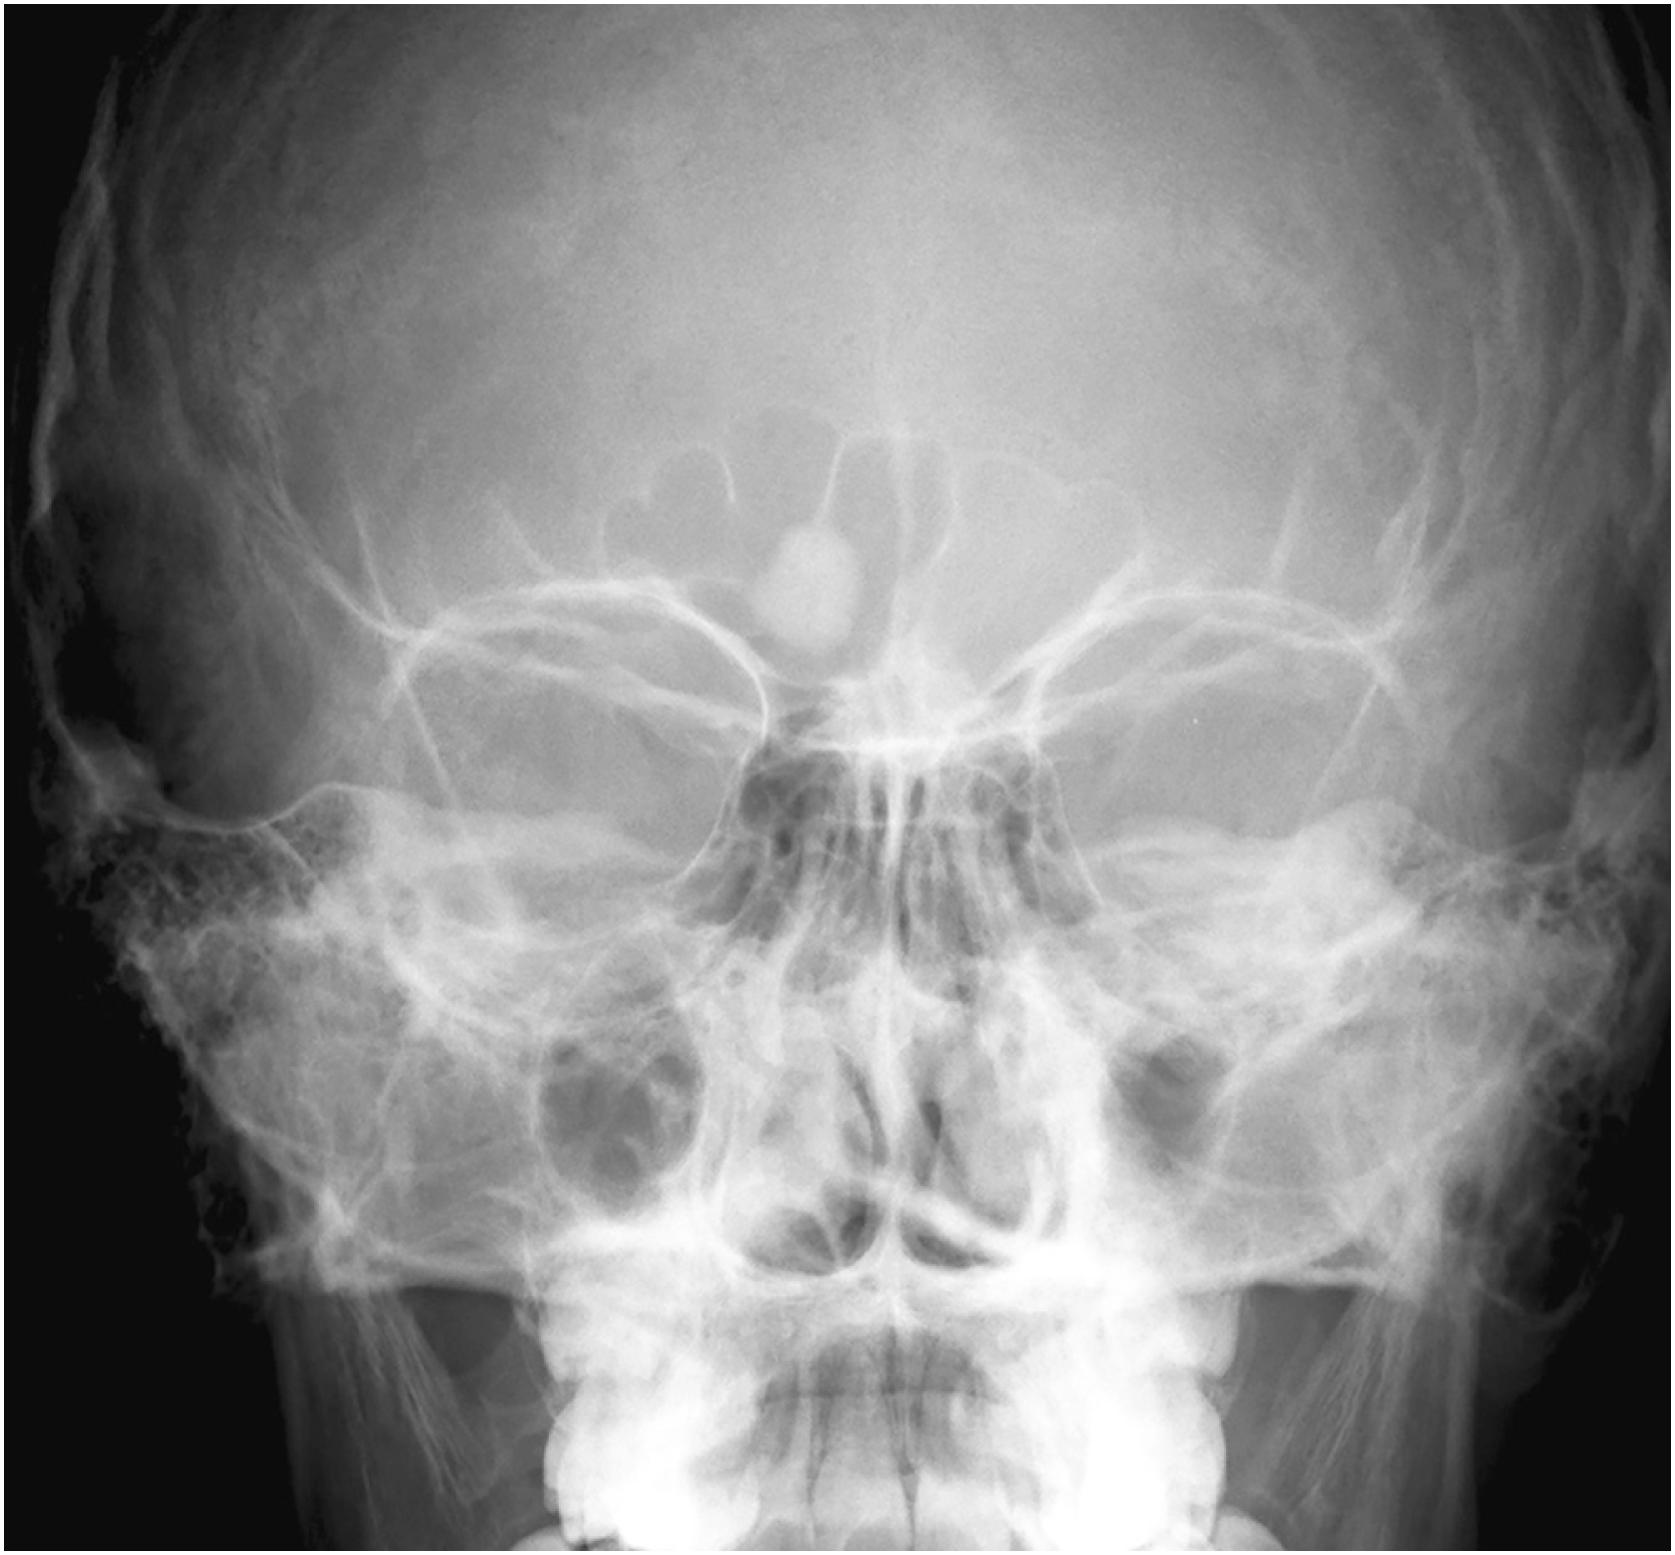 Fig. 16.6, Frontal radiograph of osteoma that is round and radiodense arising in the frontal sinus.